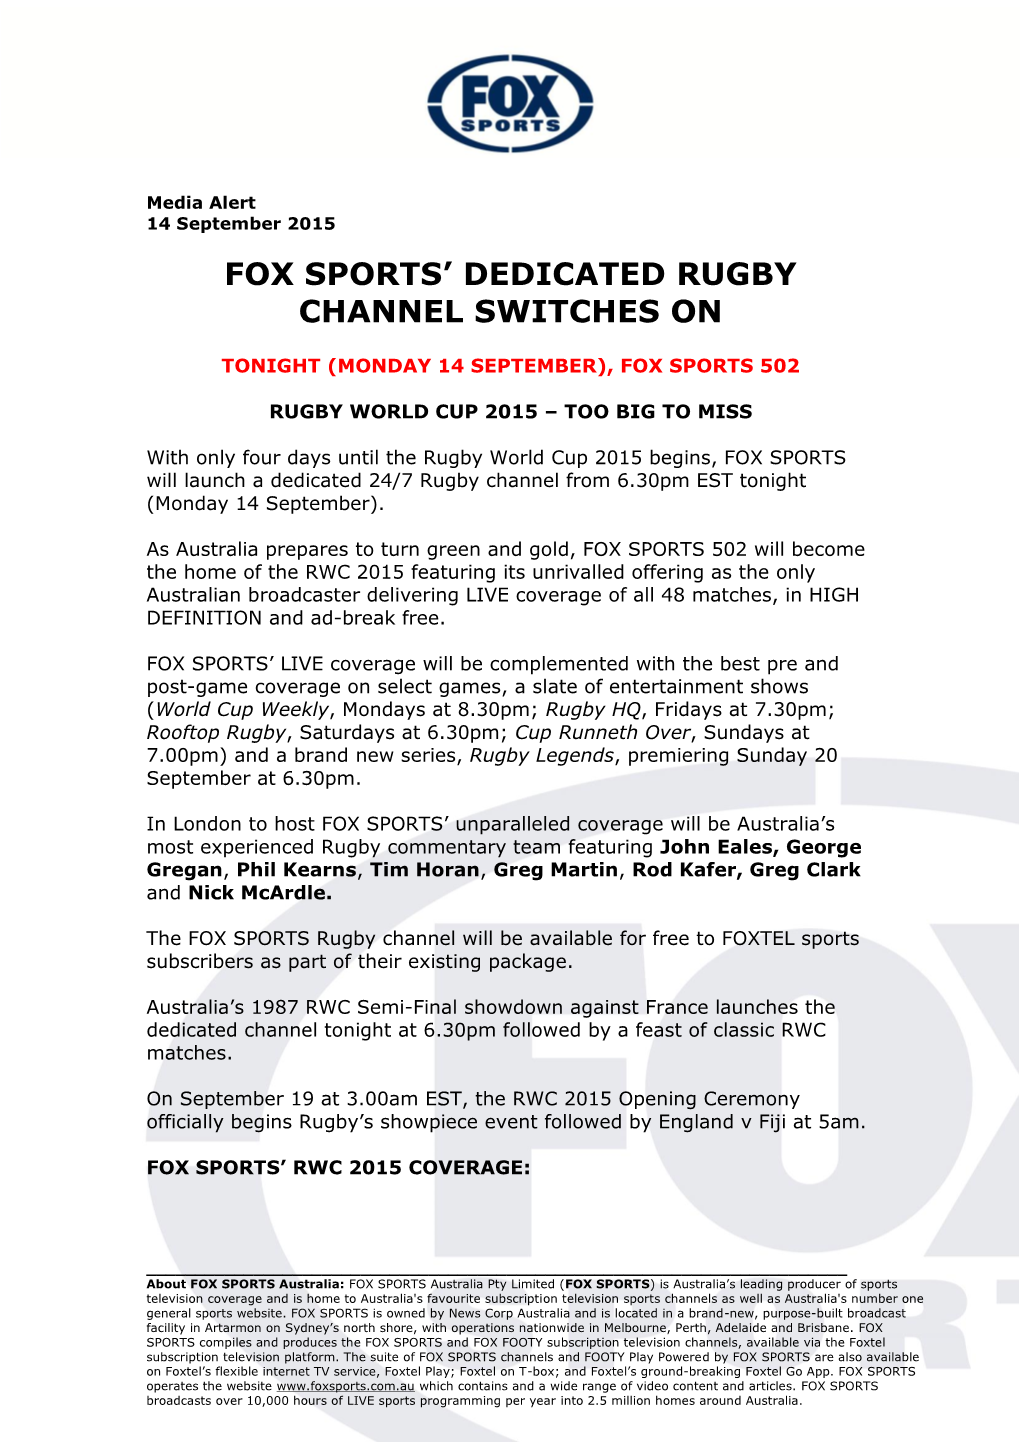 Fox Sports' Dedicated Rugby Channel Switches On